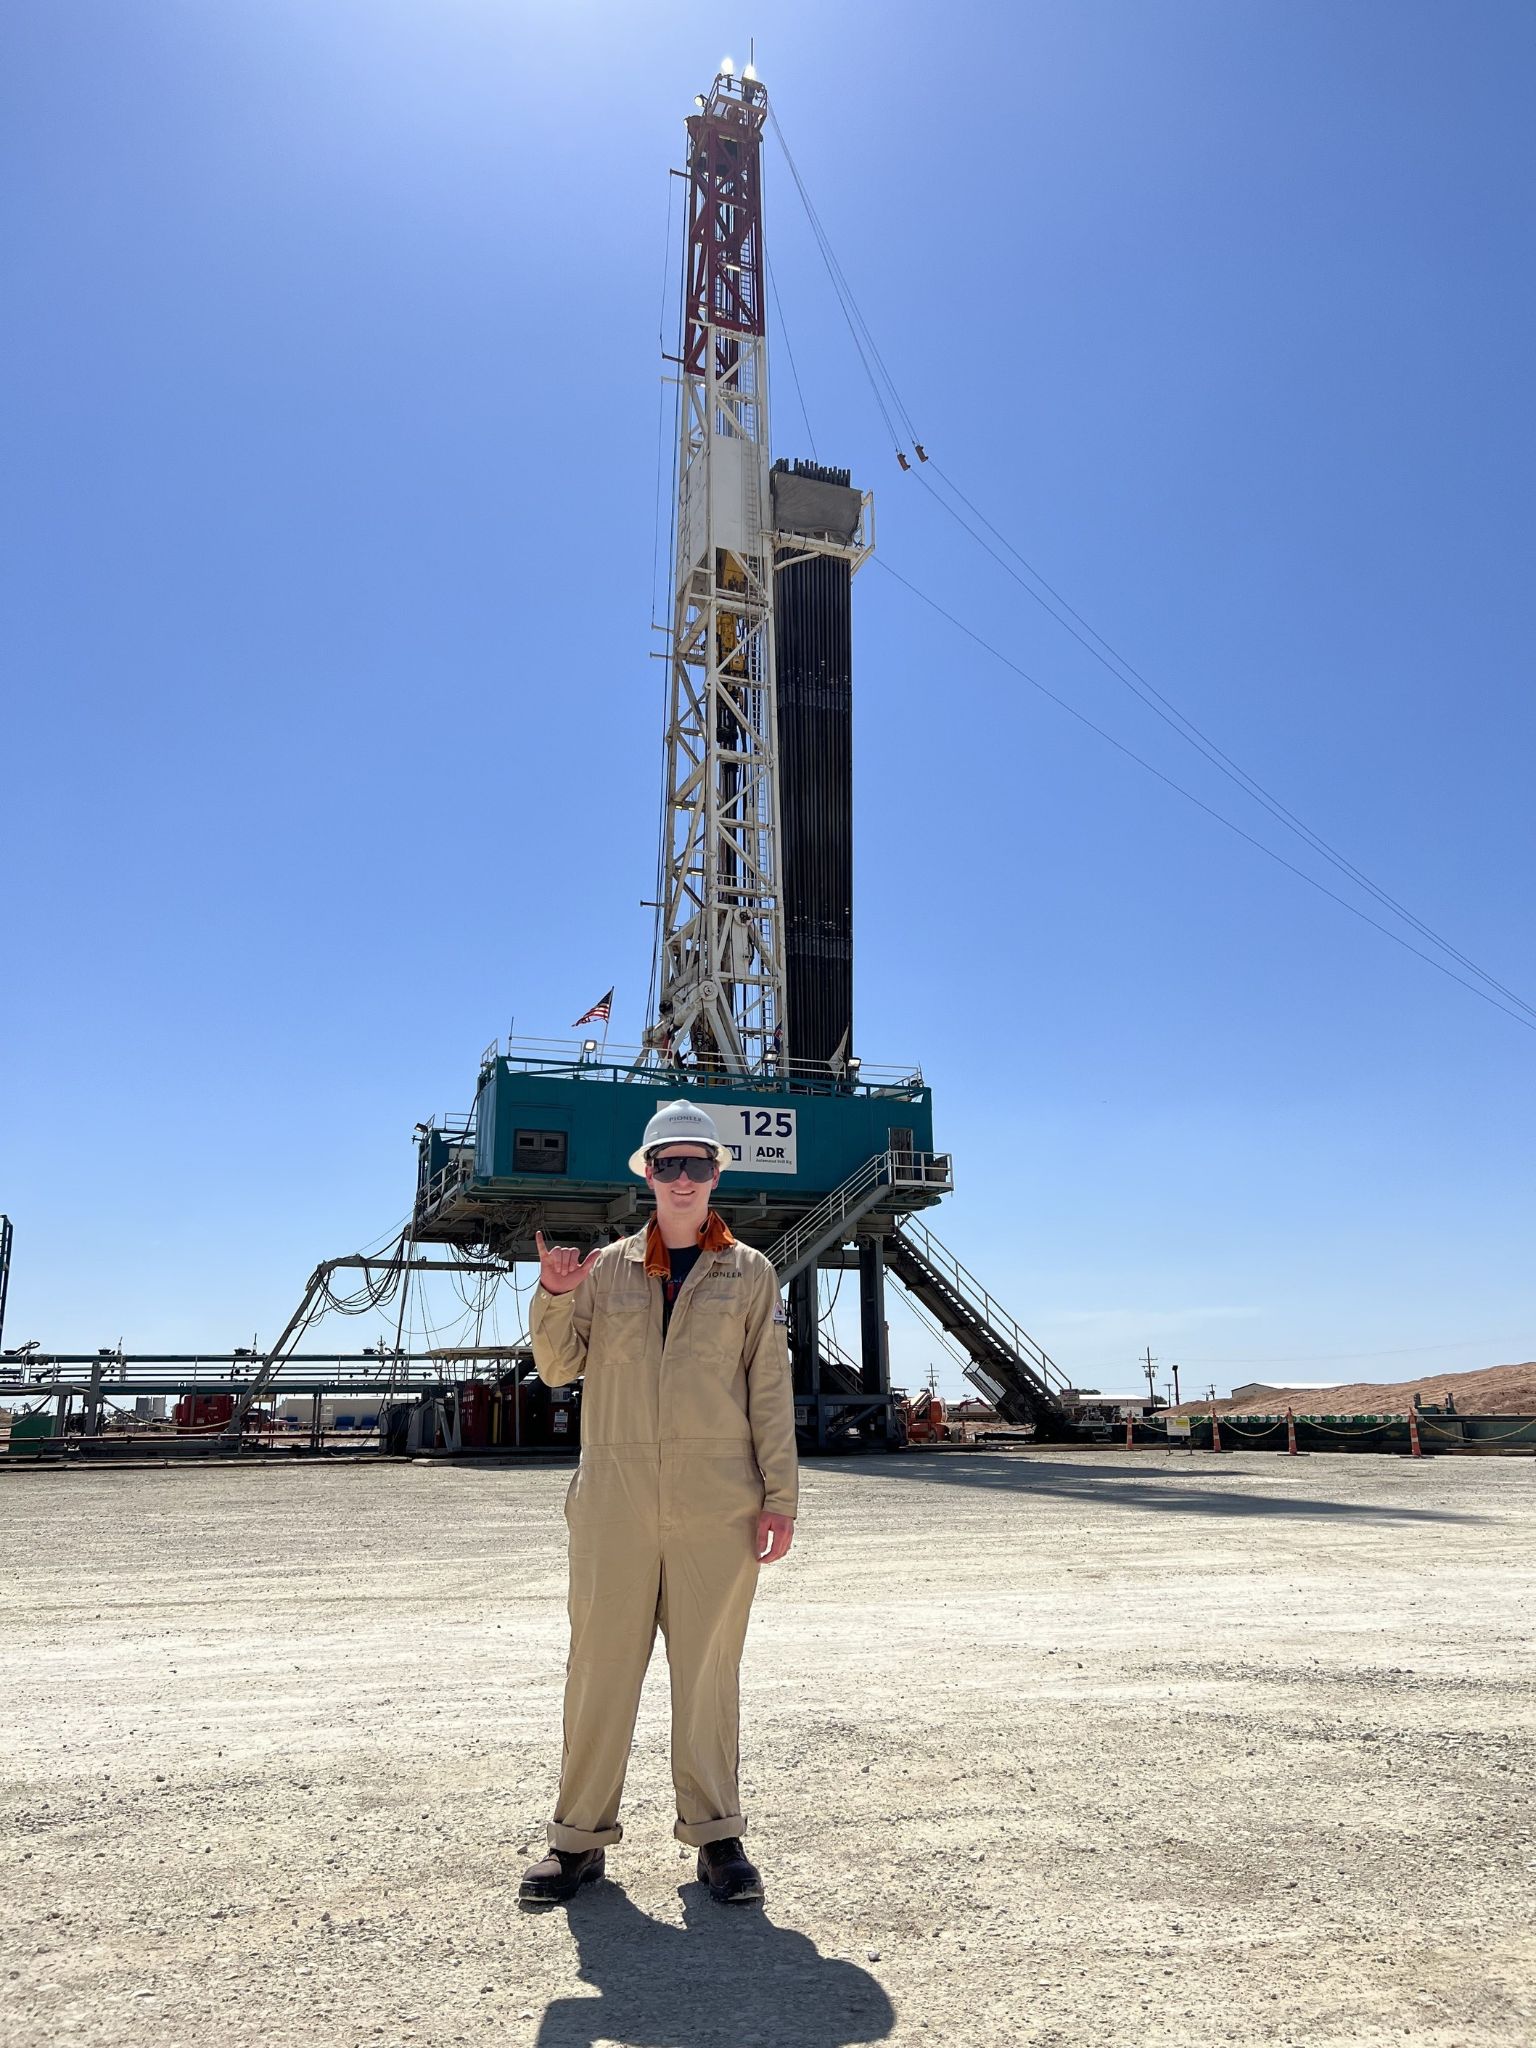 Nolan Hines with an Oil Rig